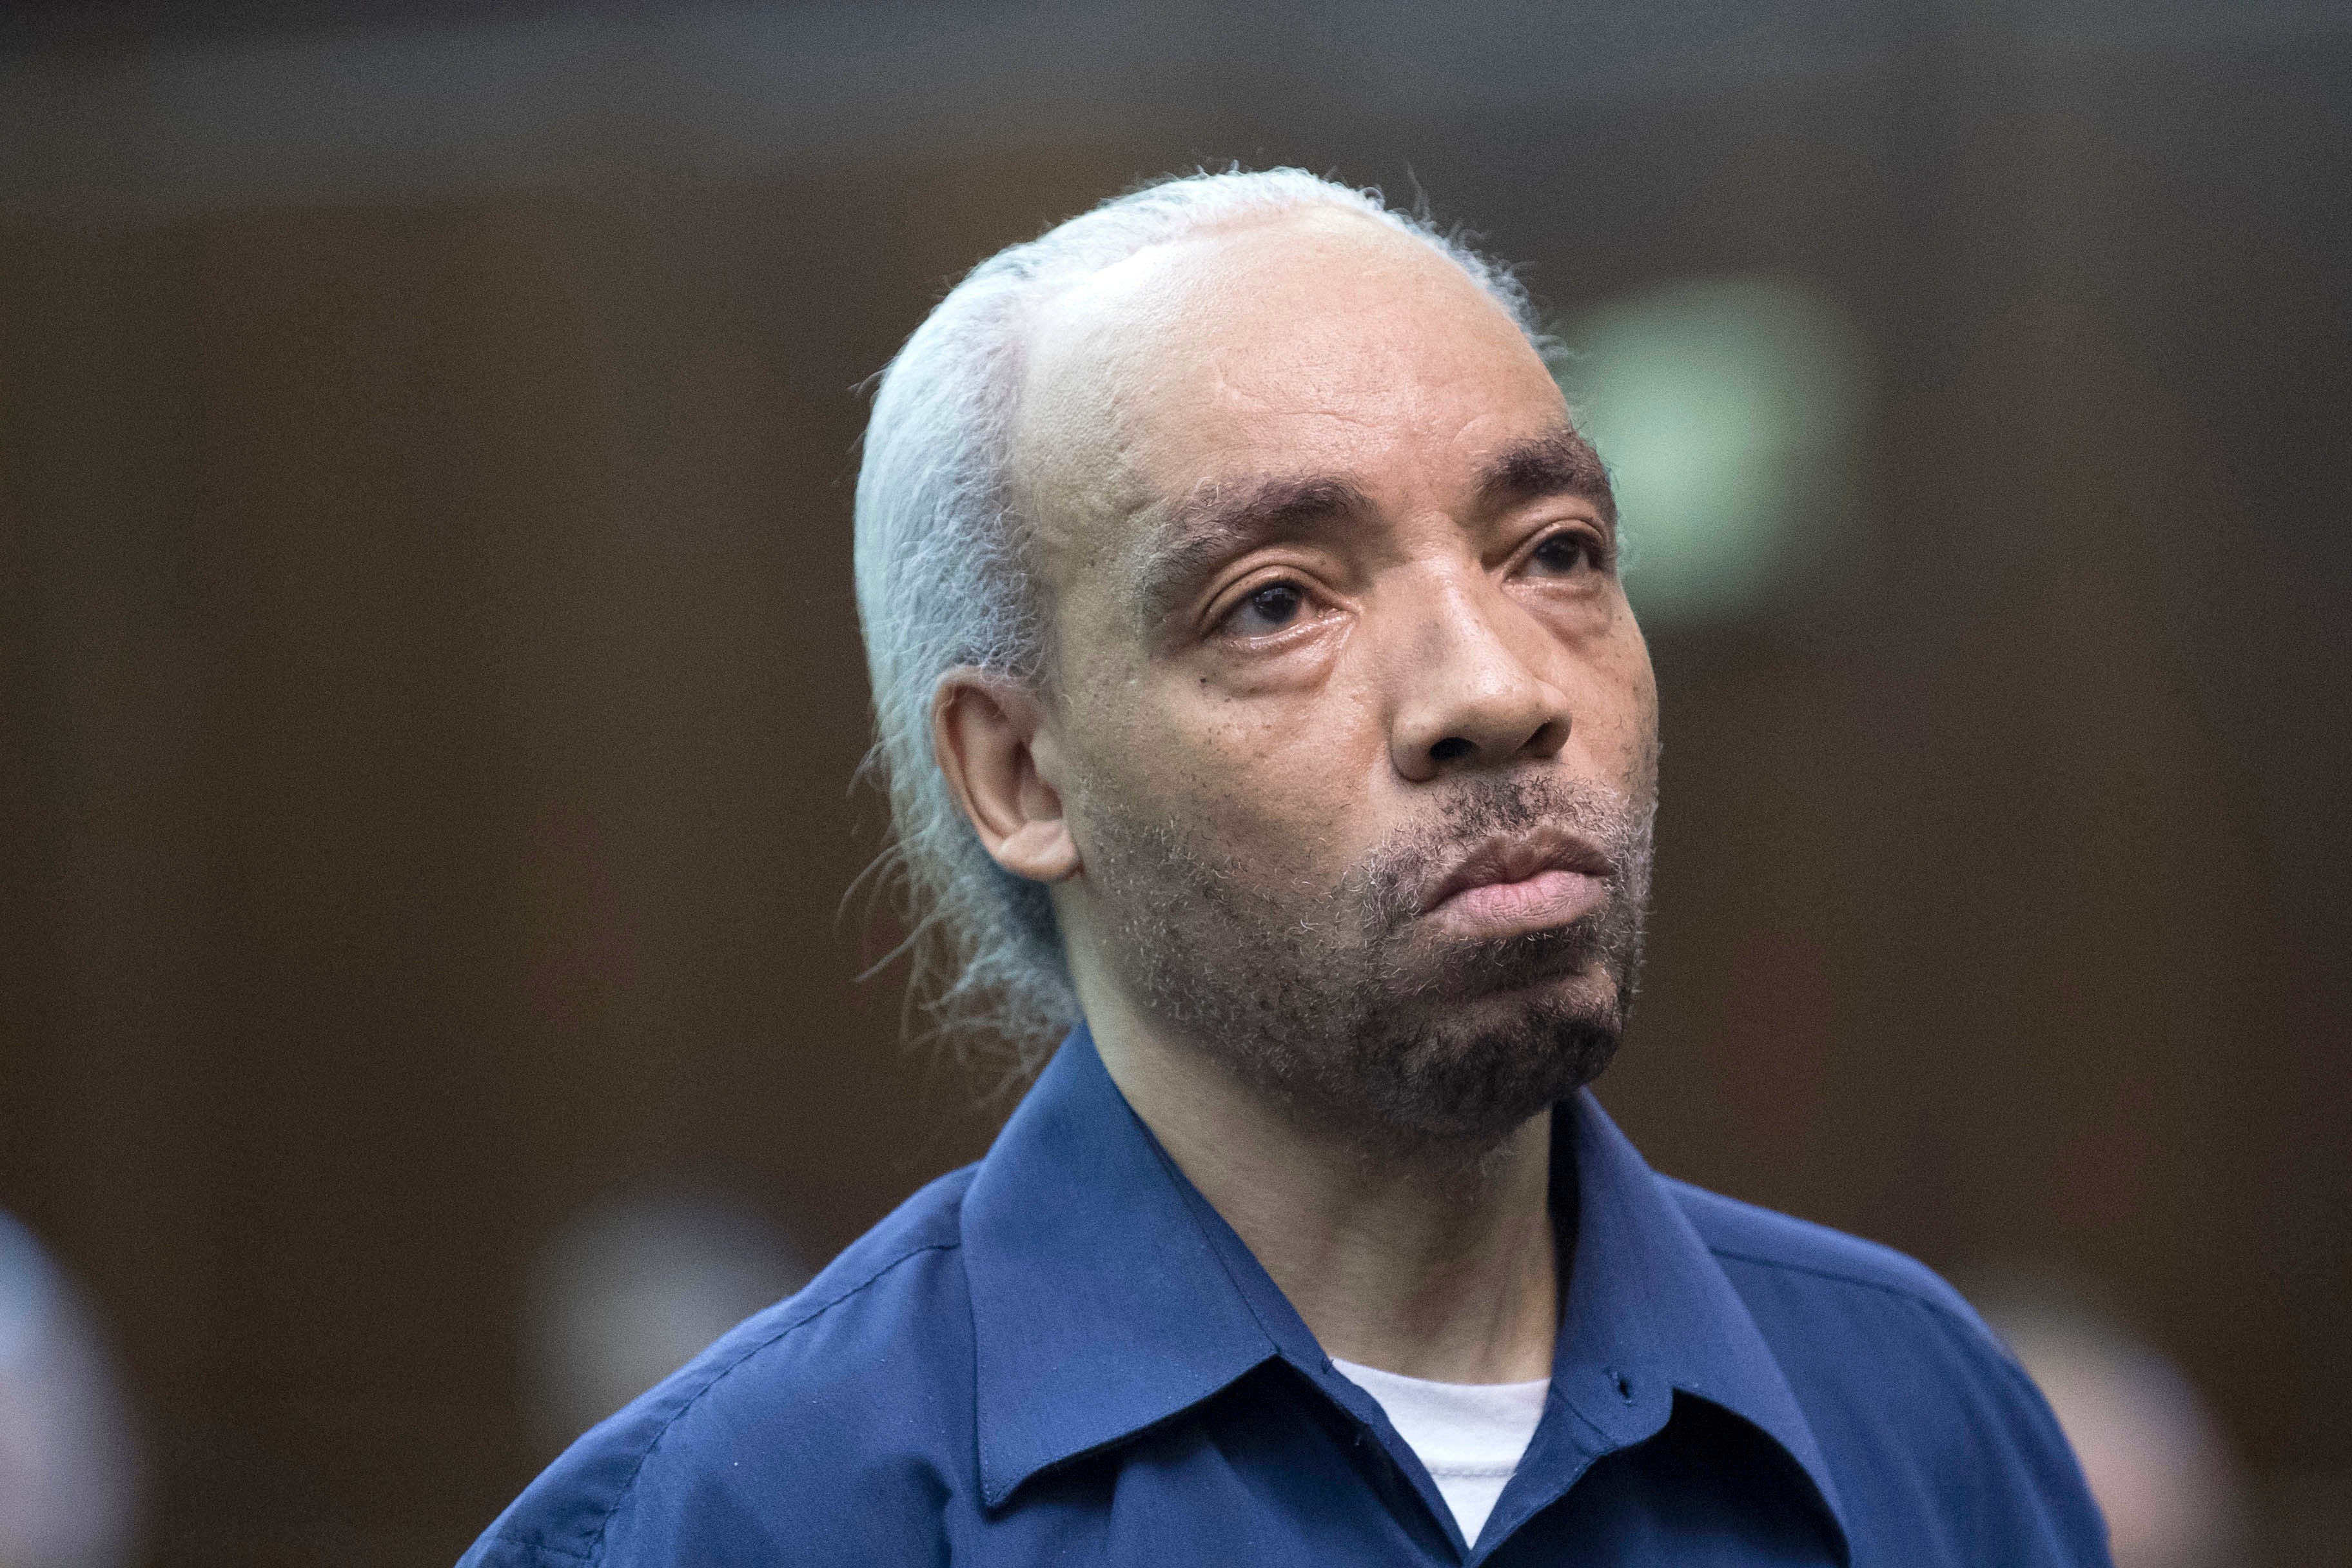 Rapper Kidd Creole, whose real name is Nathaniel Glover, in court in New York